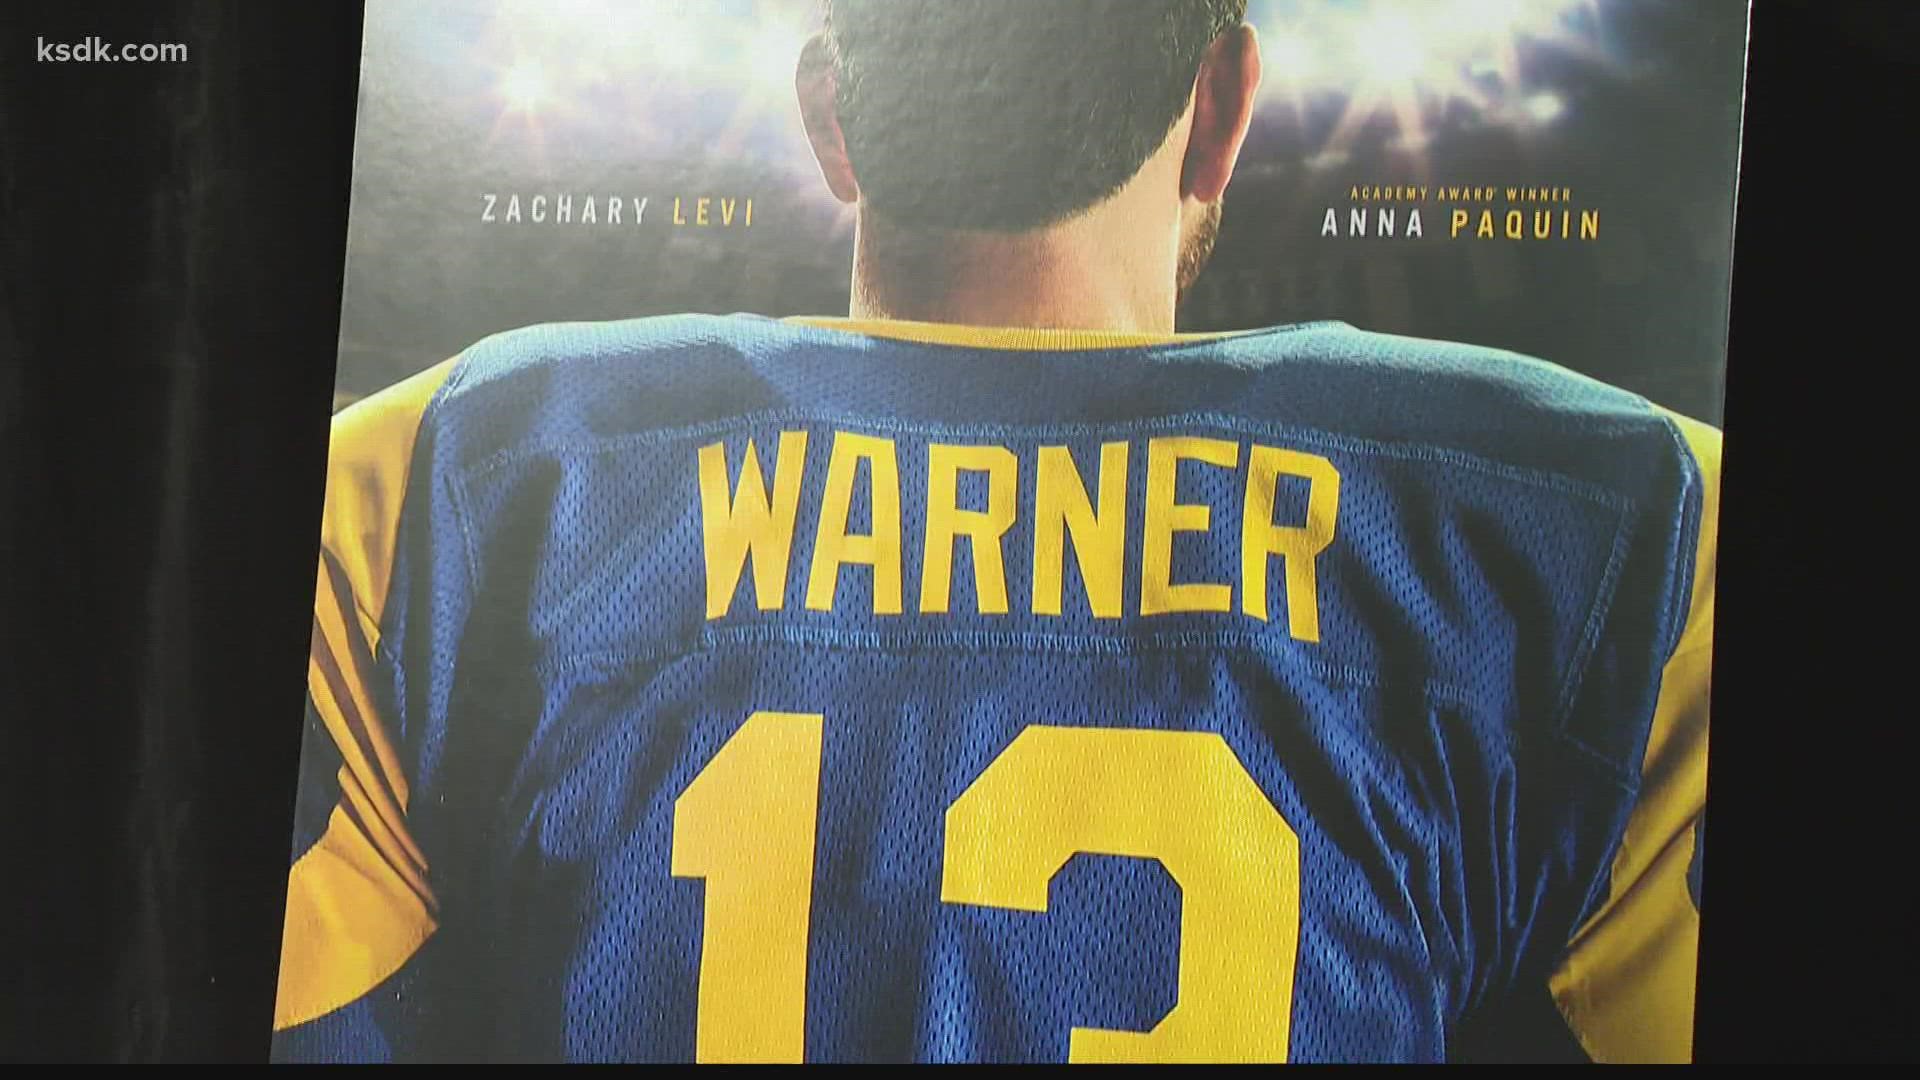 "American Underdog" profiles the real-life story of former Rams QB Kurt Warner. It debuts in theaters for everyone this Christmas.